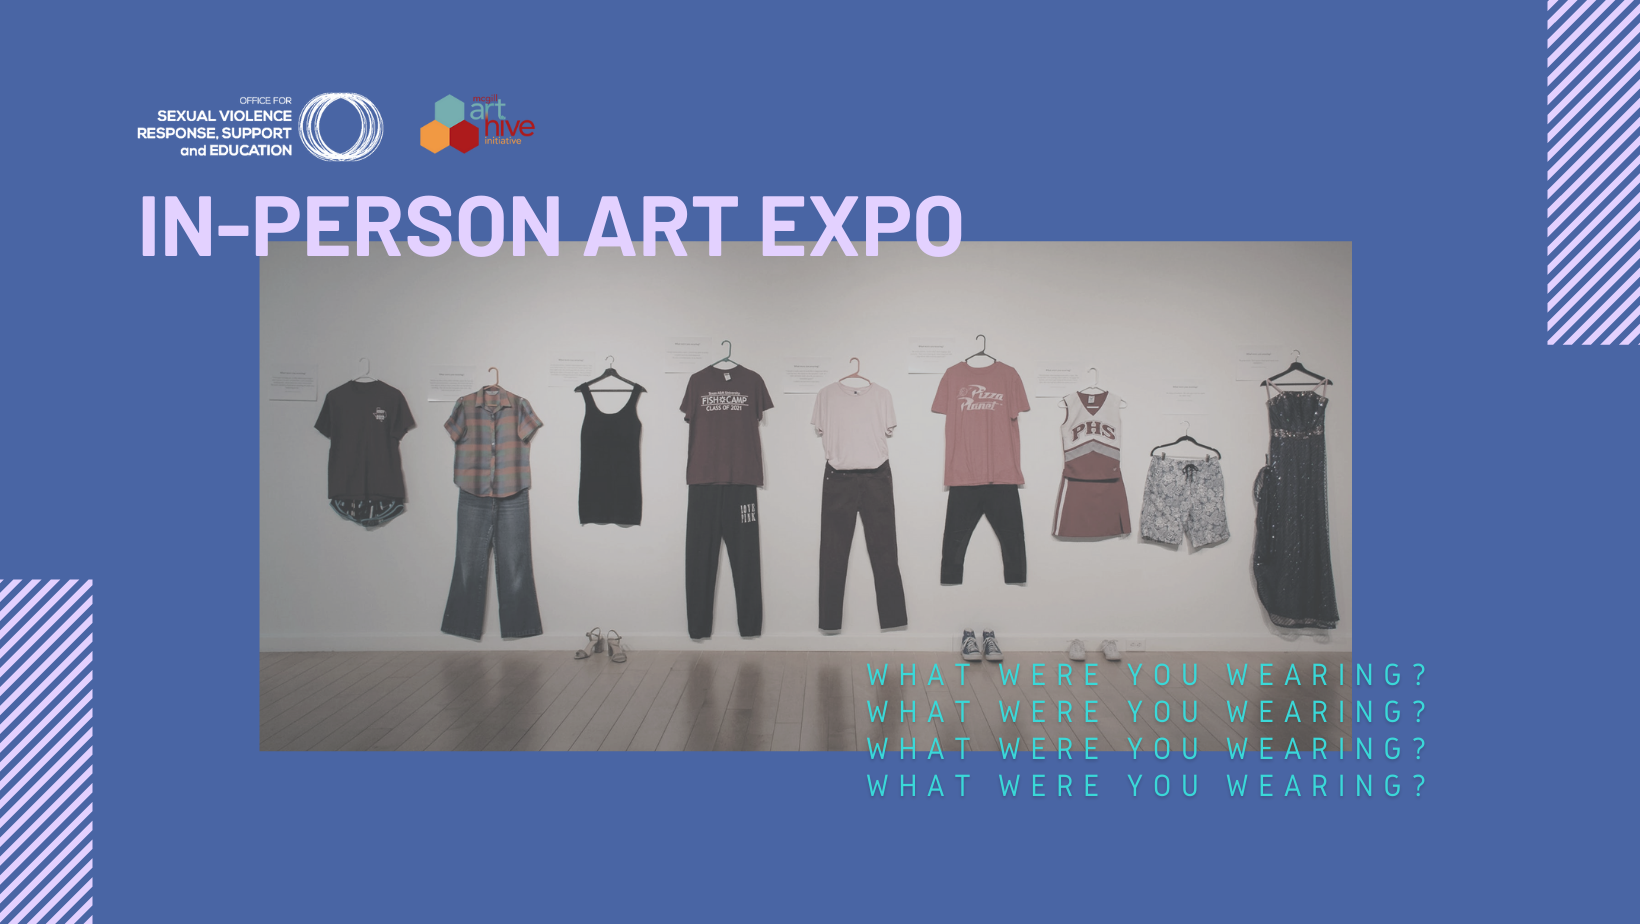 In-person art expo dark blue banner with a photo of clothes pinned to the wall and overlaying words "what were you wearing?" in green text